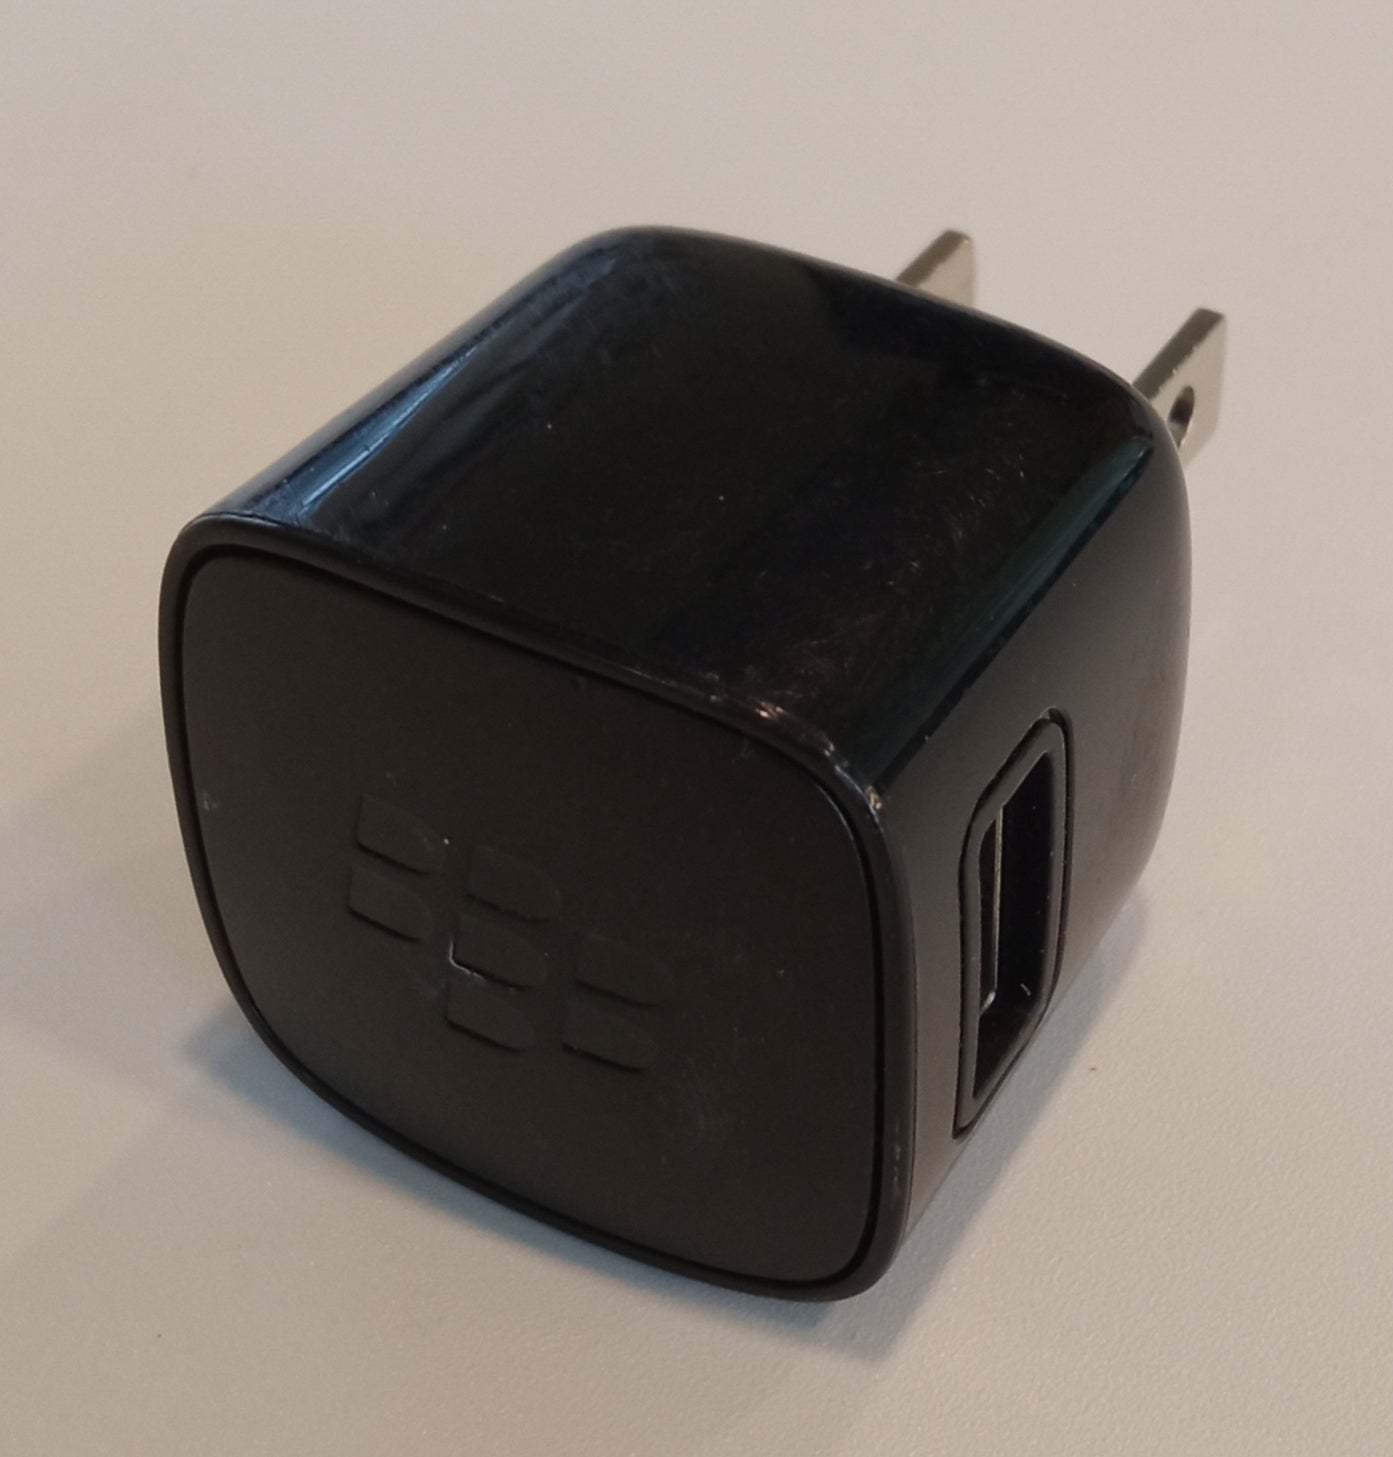 Blackberry USB Adapter - US Imported